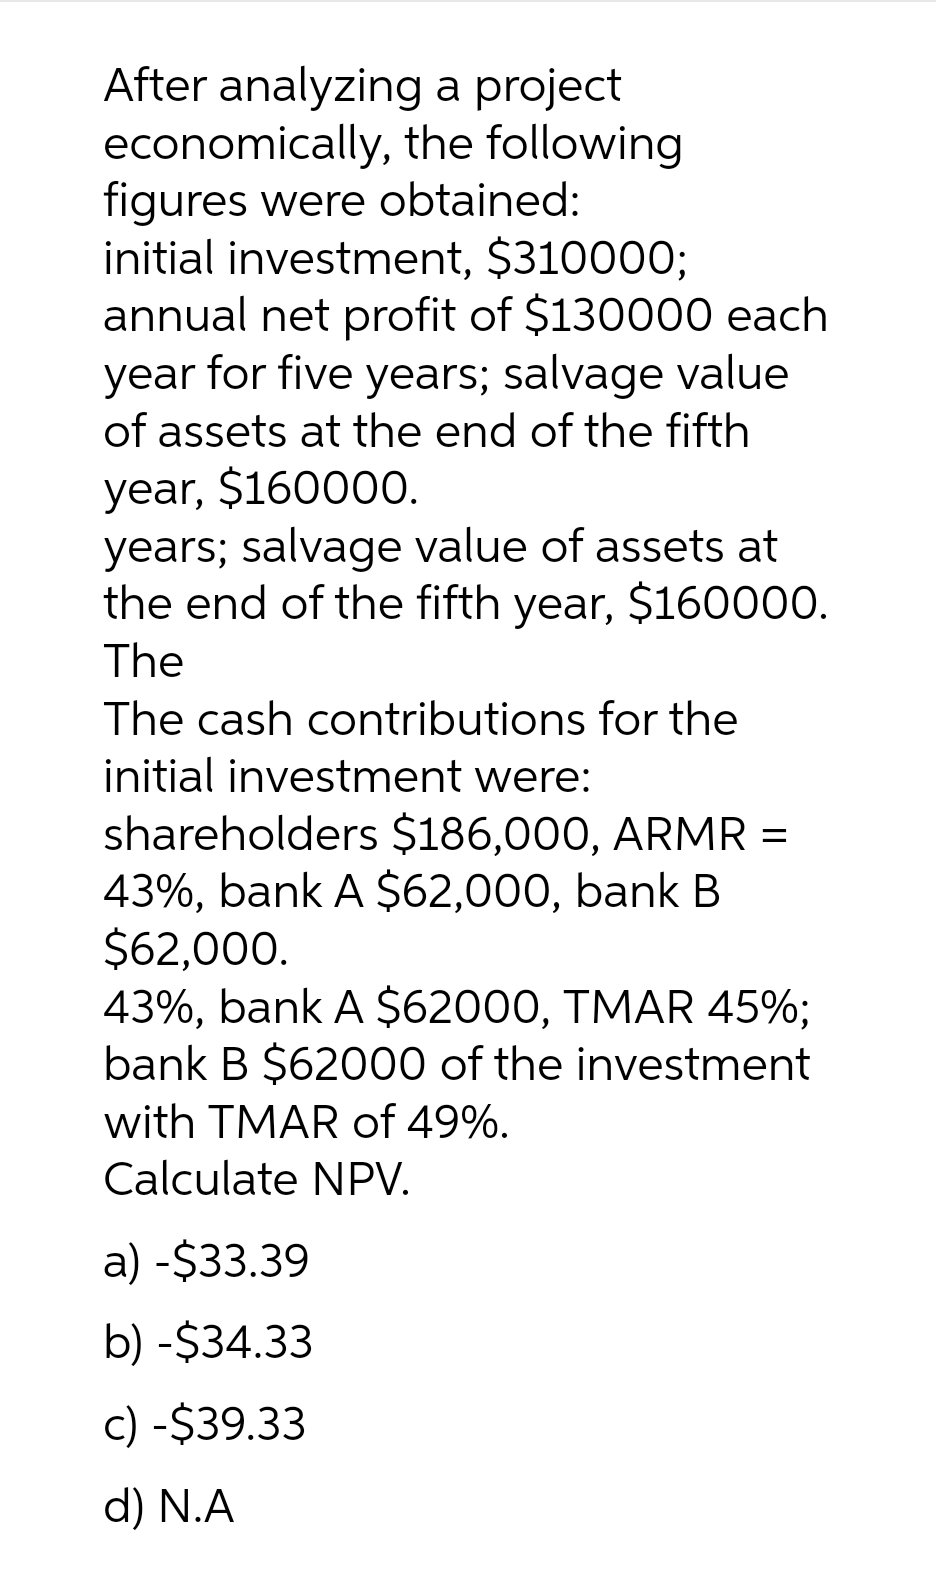 After analyzing a project
economically,
figures were obtained:
initial investment, $310000;
annual net profit of $130000 each
year for five years; salvage value
of assets at the end of the fifth
year, $160000.
years; salvage value of assets at
the end of the fifth year, $160000.
The
The cash contributions for the
initial investment were:
the following
shareholders $186,000, ARMR :
=
43%, bank A $62,000, bank B
$62,000.
43%, bank A $62000, TMAR 45%;
bank B $62000 of the investment
with TMAR of 49%.
Calculate NPV.
a) -$33.39
b) -$34.33
c) -$39.33
d) N.A